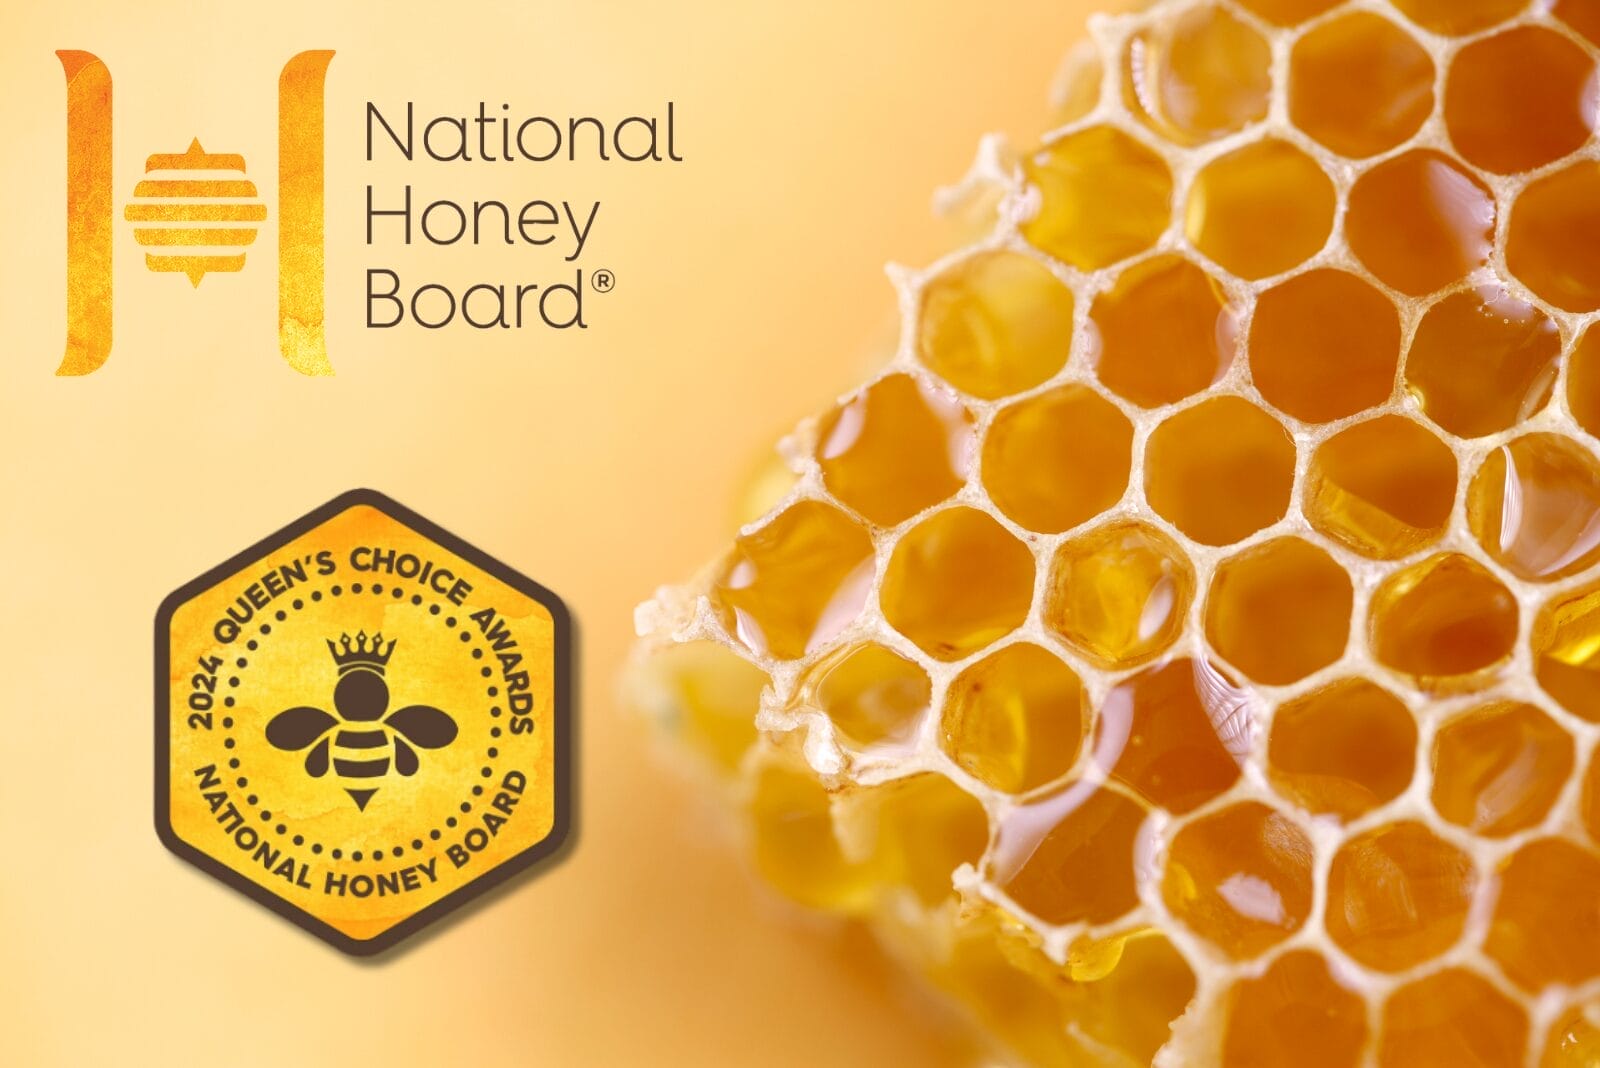 The National Honey Board and Queen's Choice Award logos on honeycomb background.